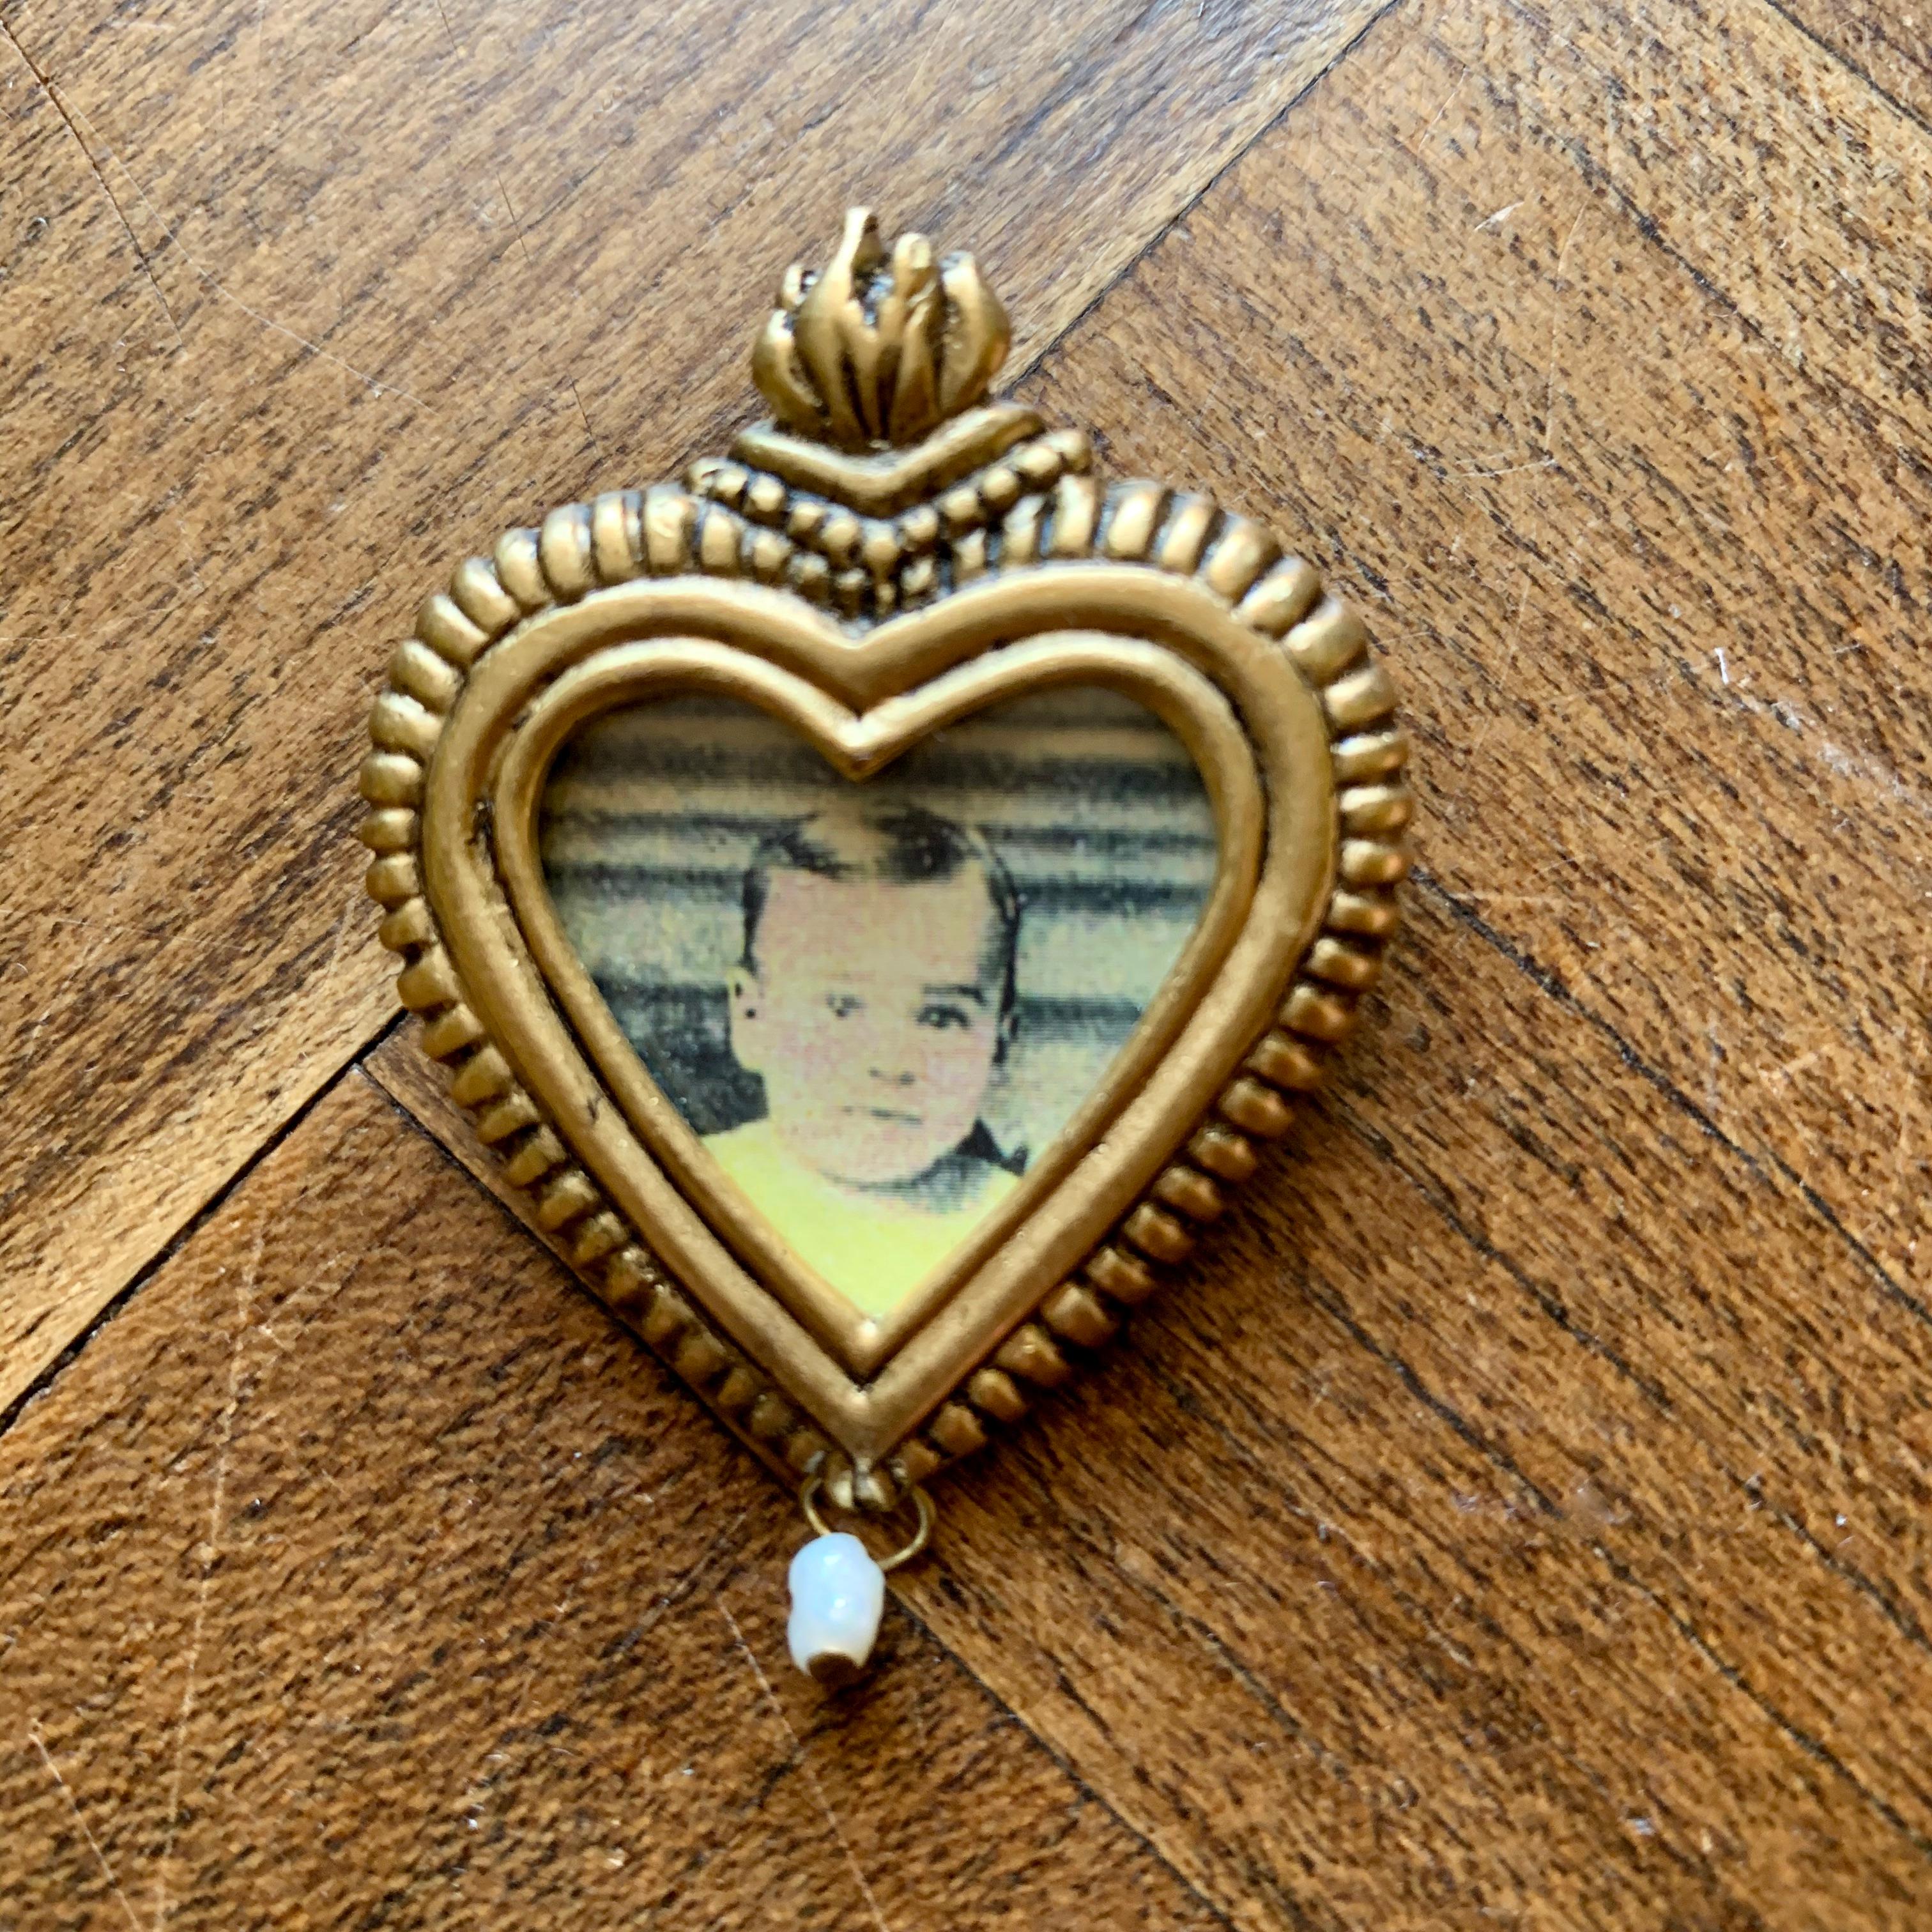 From John Wind's Maximal Art 1980s jewelry collection, a portrait pin molded as a sacred heart.

The cast metal heart shaped picture holder has a molded flame at the top and a dangling seed pearl at the bottom. Shown with a place holder picture of